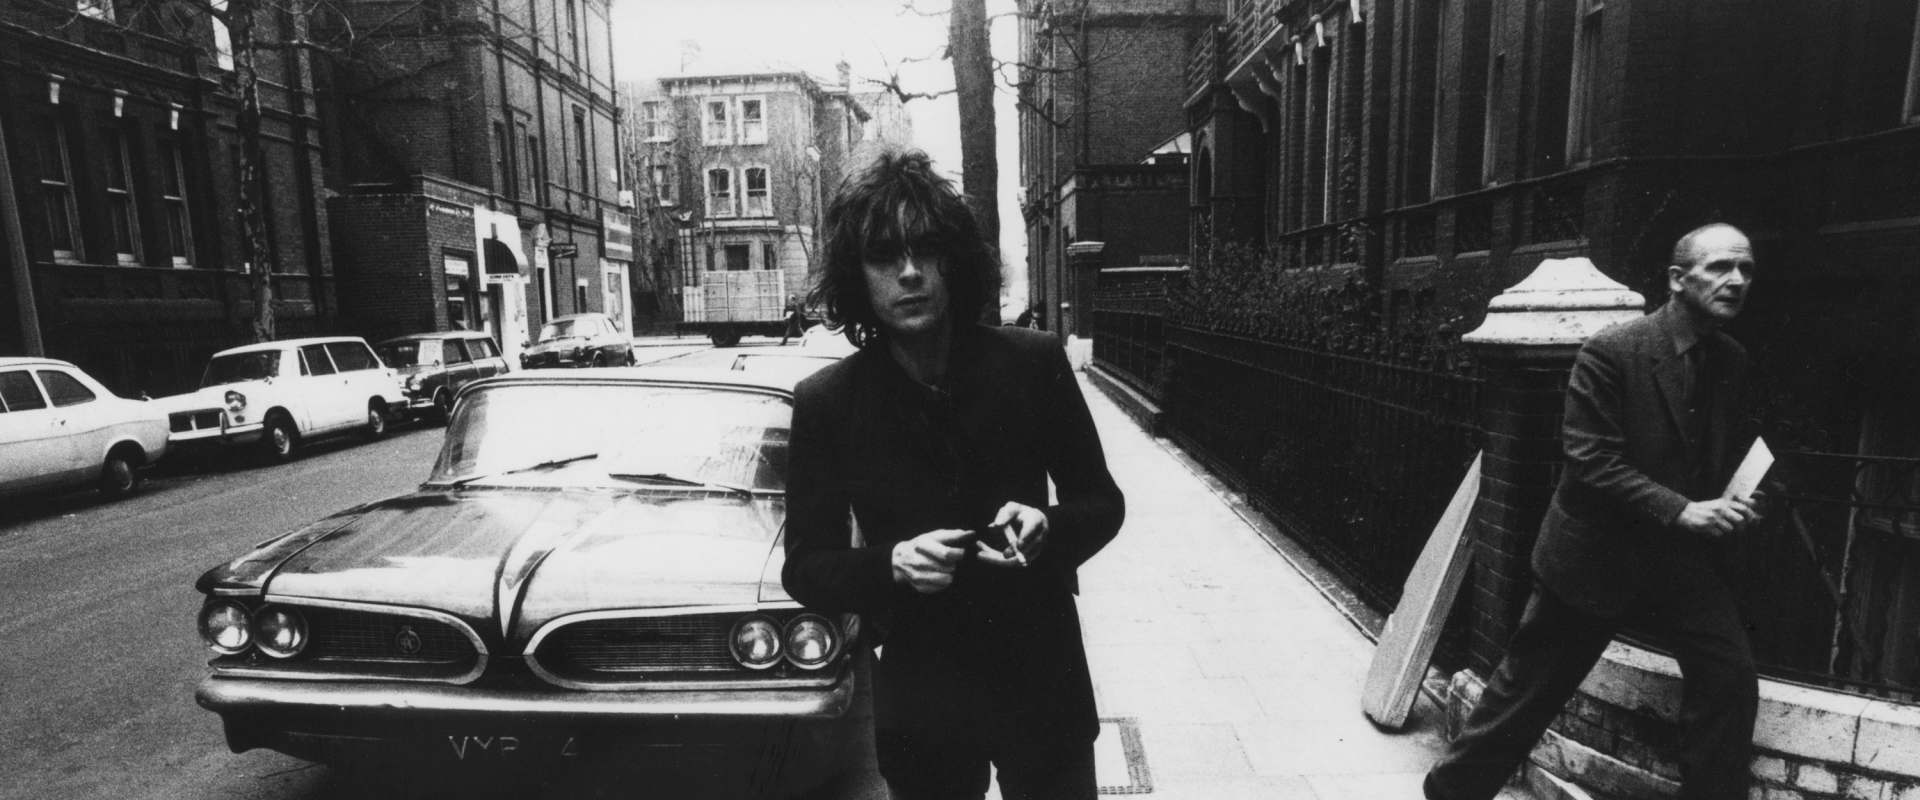 Have You Got It Yet? The Story of Syd Barrett and Pink Floyd background 1